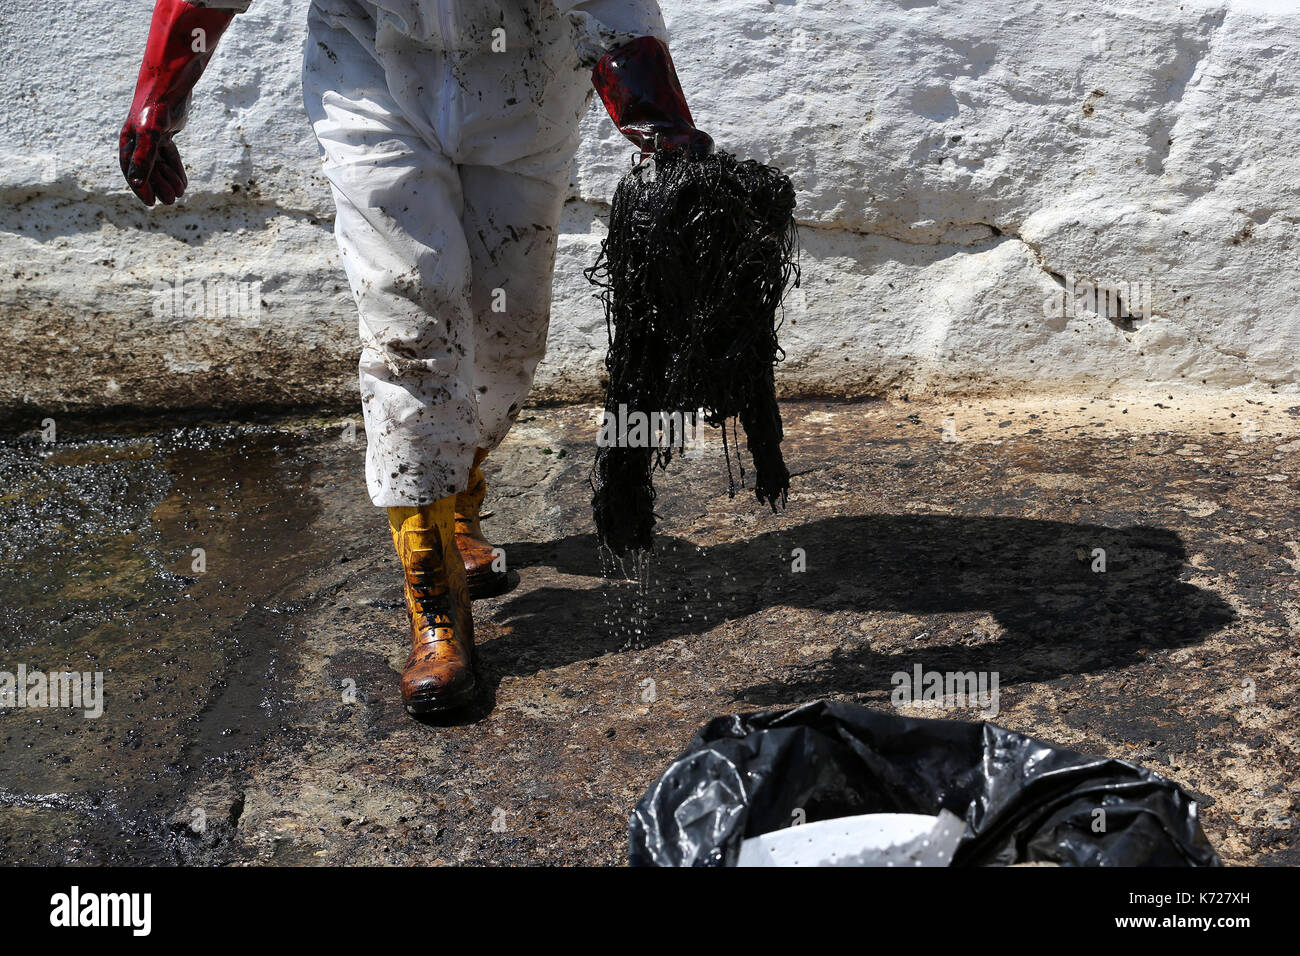 (170914) -- ATHENS, Sept. 14, 2017 (Xinhua) -- A specialized crew member takes part in an operation to clean the oil spill from the shores of Piraeus, a southeast suburb of Athens, capital of Greece, on Sept. 14, 2017. A major clean-up operation which was underway on Thursday to address an oil spill that has spread across a large area of the Saronic Gulf will last for about three weeks, Greek Shipping Minister Panagiotis Kouroumblis told a press briefing. The environmental crisis broke out on Sunday after the sinking of small tanker 'Agia Zoni II' carrying about 2,500 tons of oil, which was an Stock Photo